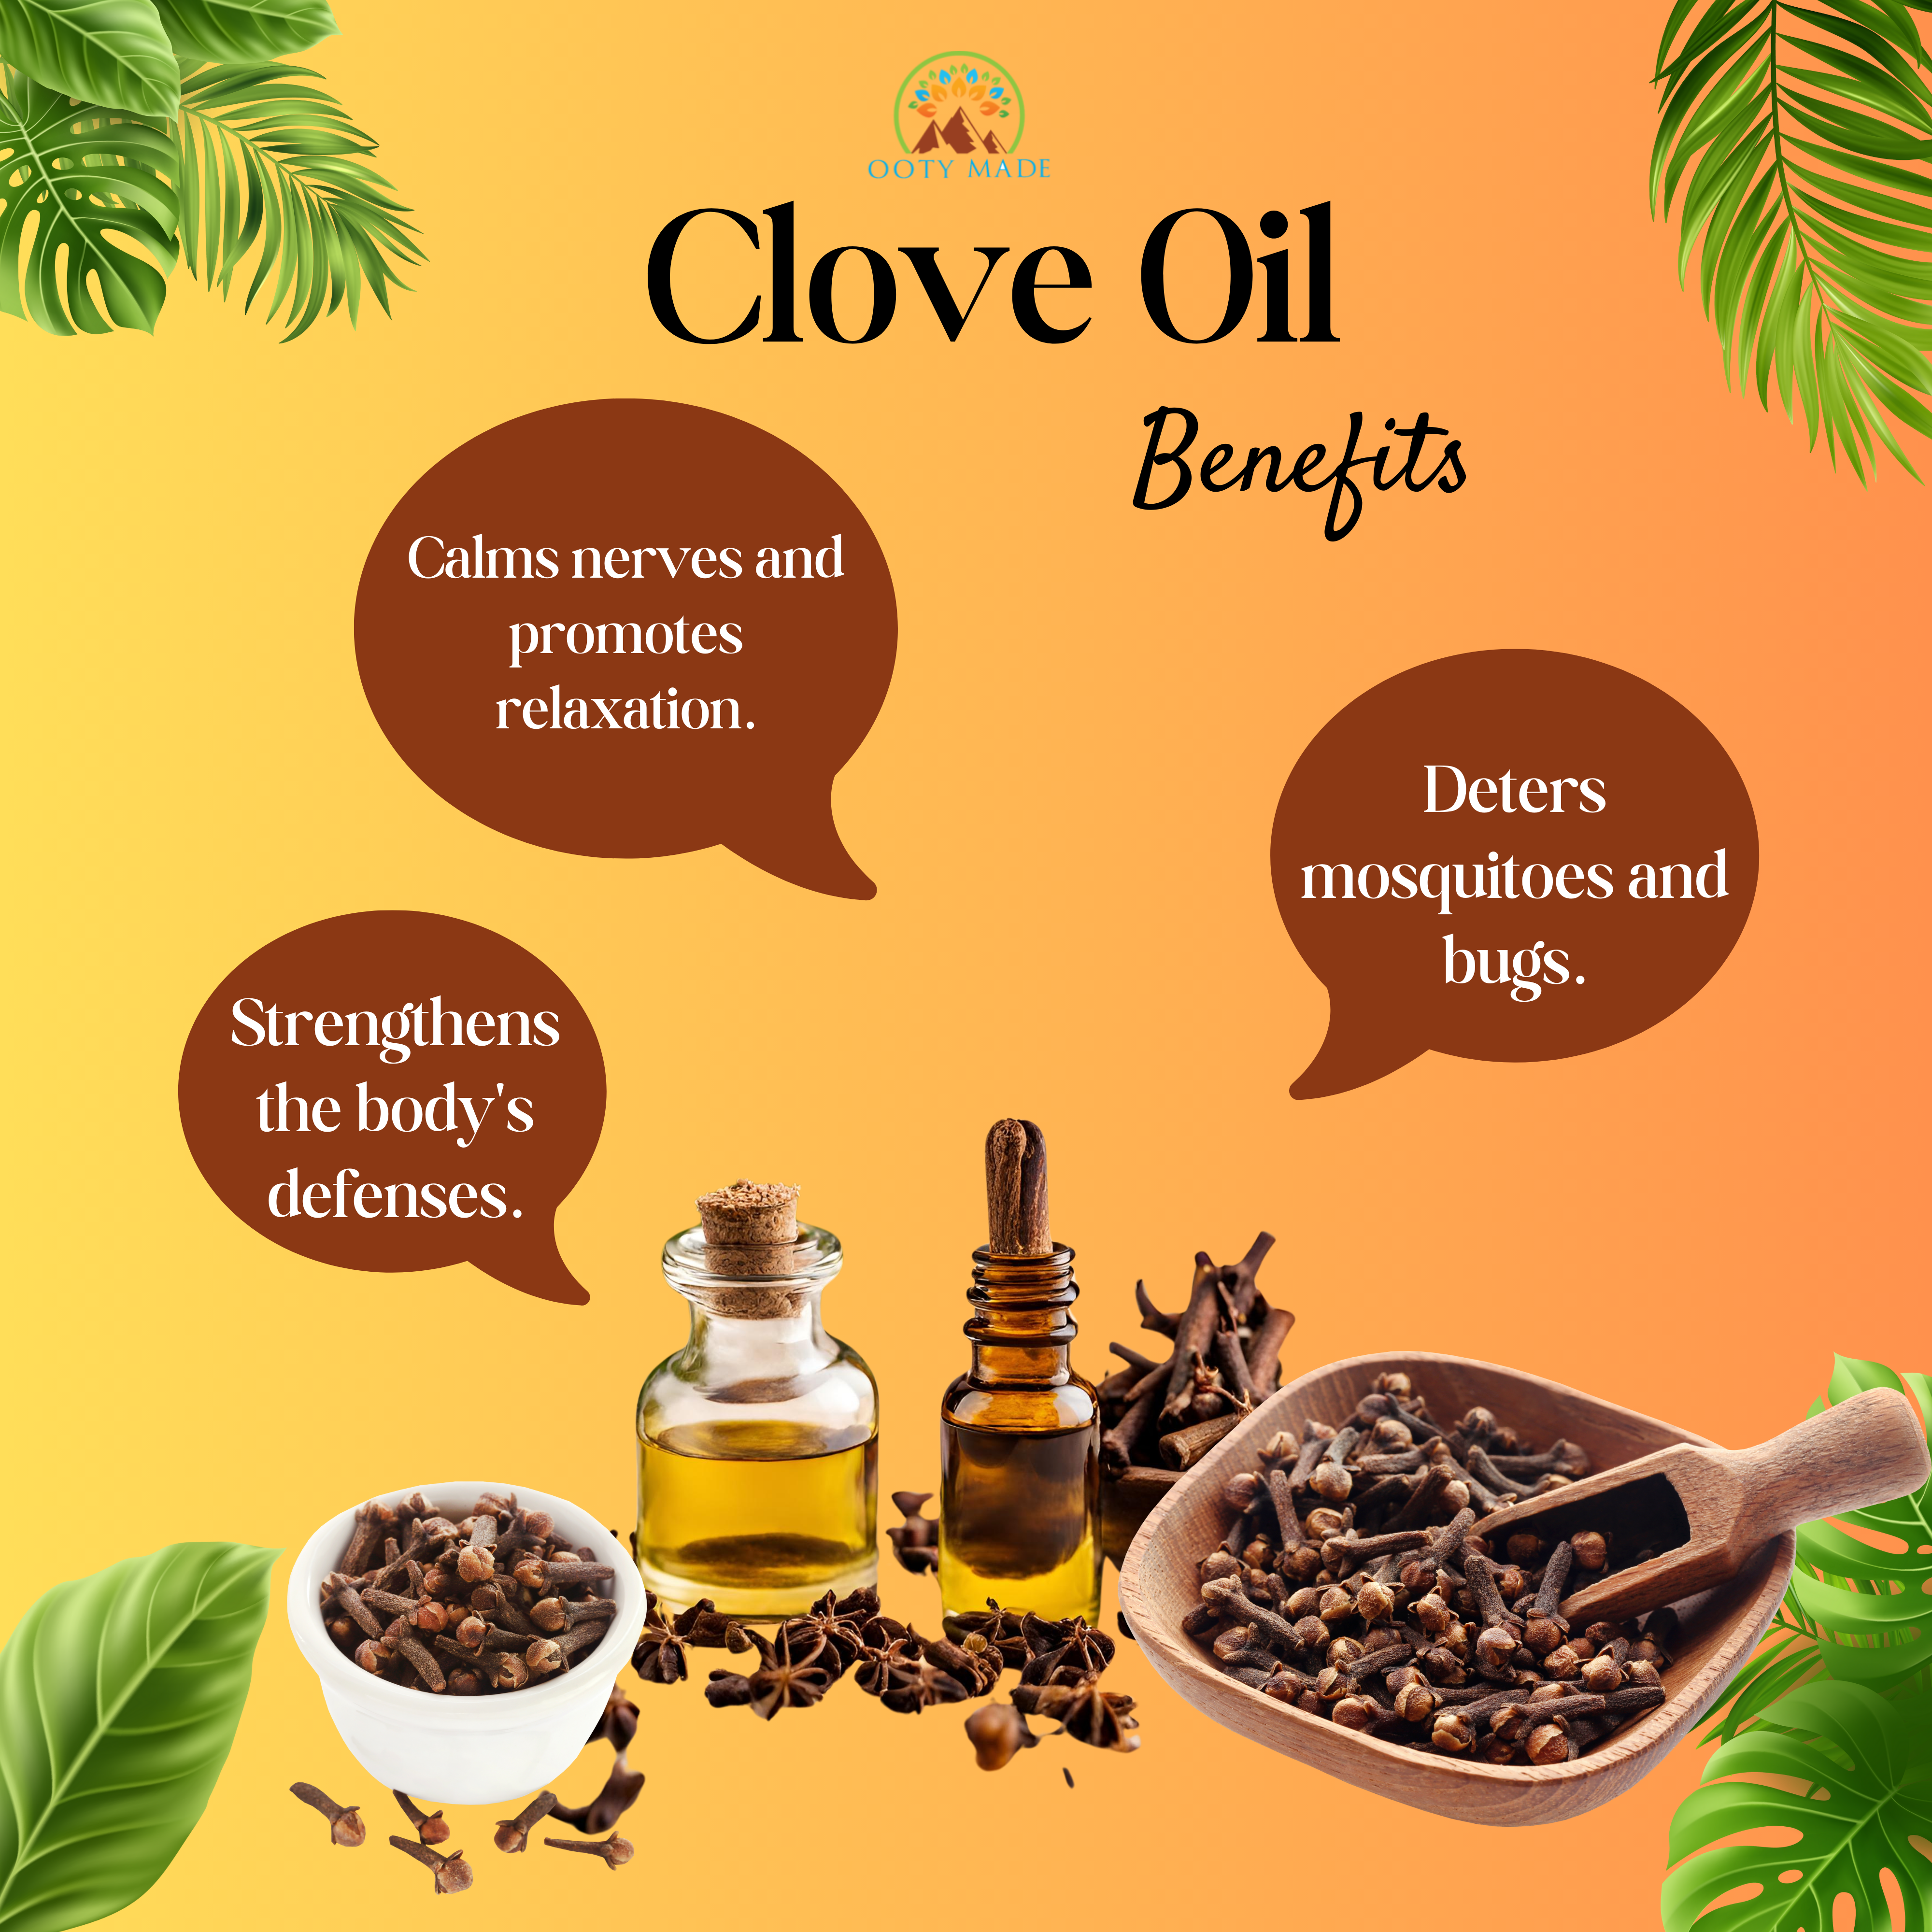 Premium Pure Clove Oil - The Best Clove Oil for Teeth, Gums, and Skin